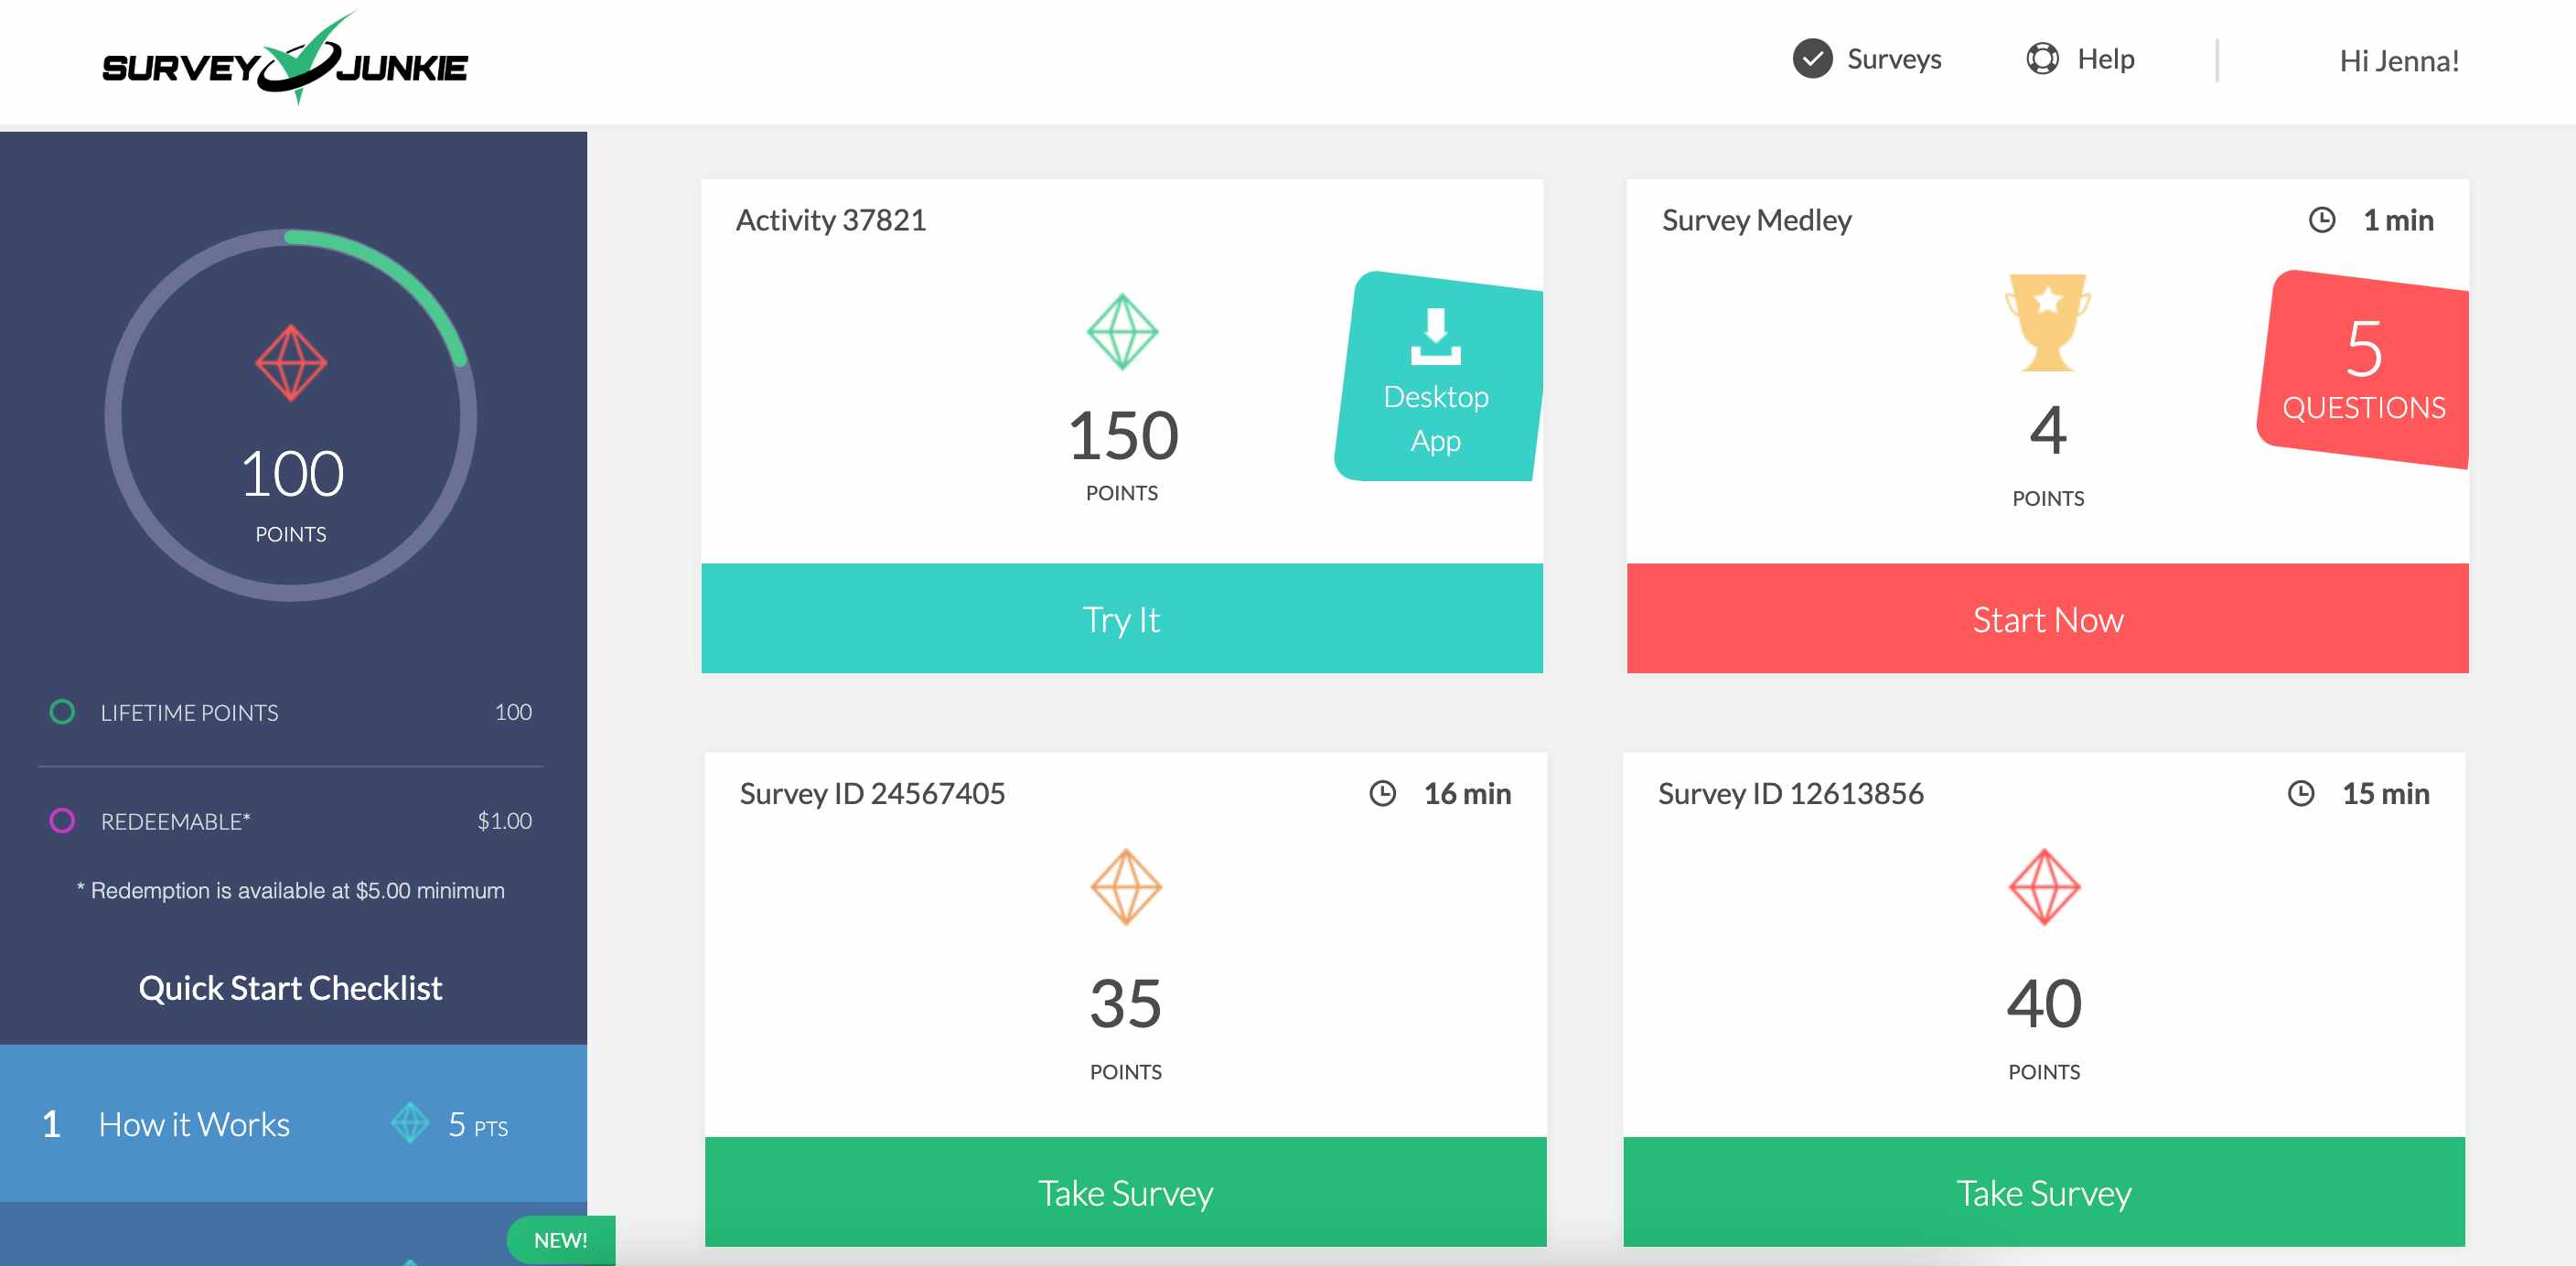 a user's survey junkie dashboard showing 100 points earned and available surveys to take for future points